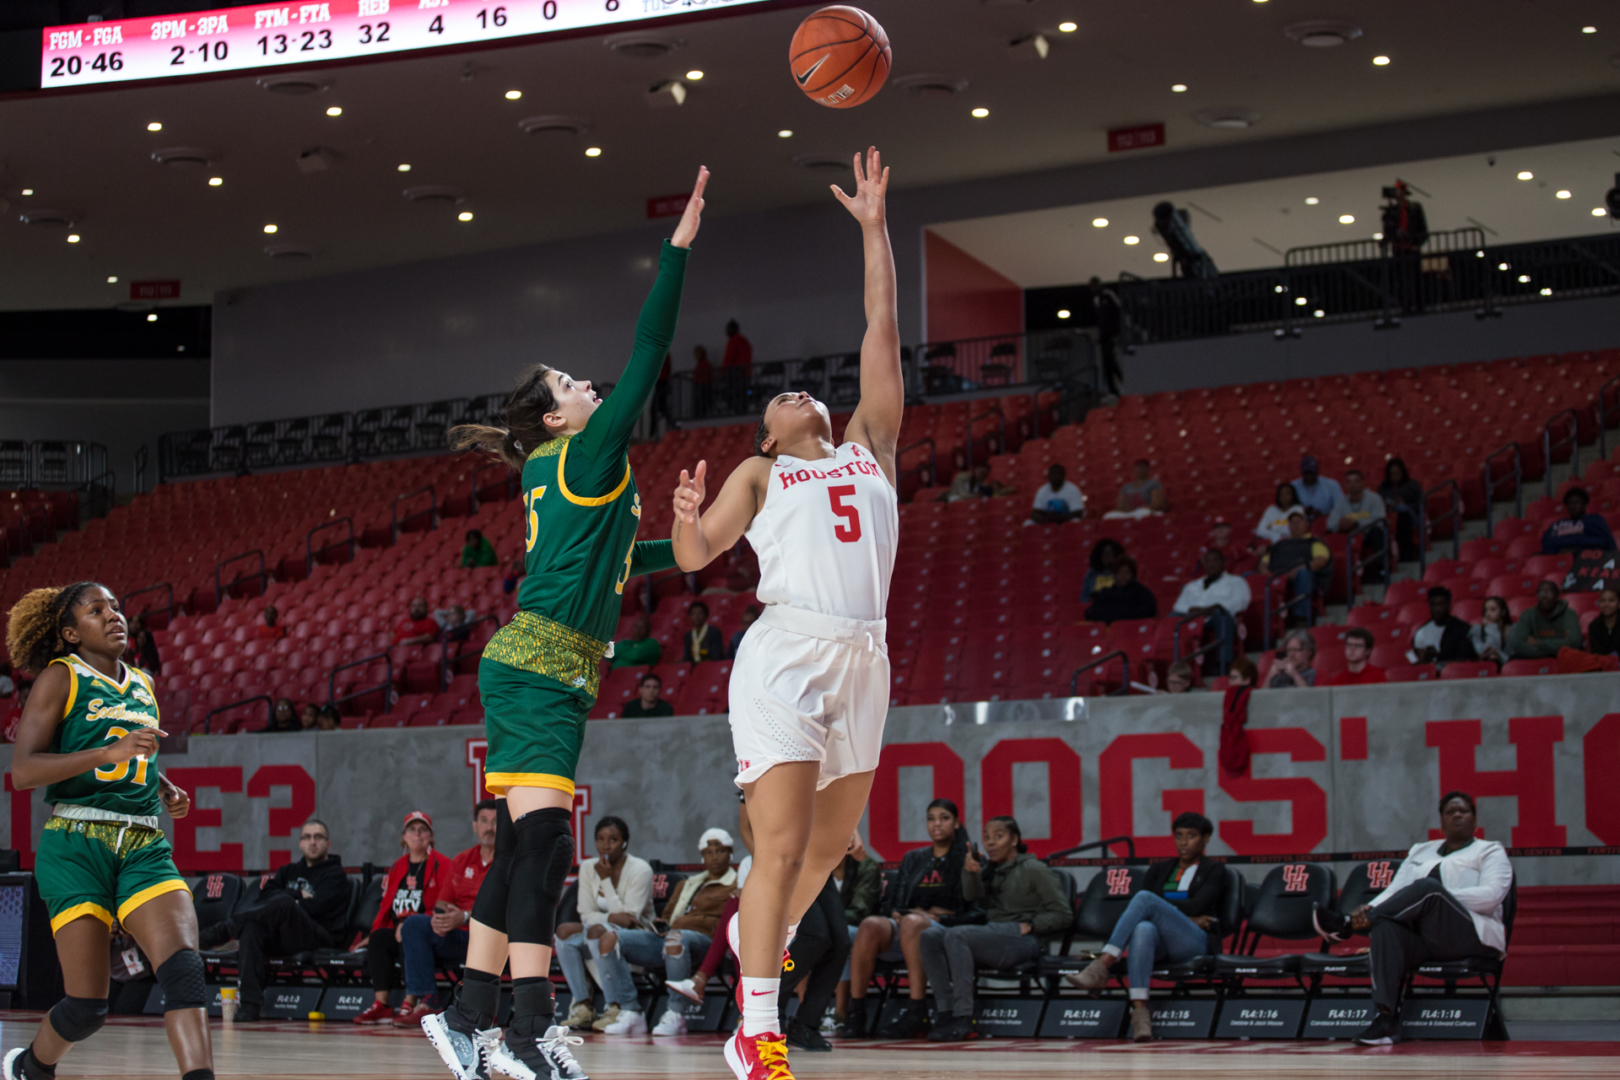 Houston's women's basketball team fell to Syracuse 87-62 at the Greater Victoria Invitational on Thanksgiving. They face California Baptist on Friday with hopes of bouncing back from the loss. | Trevor Nolley/The Cougar